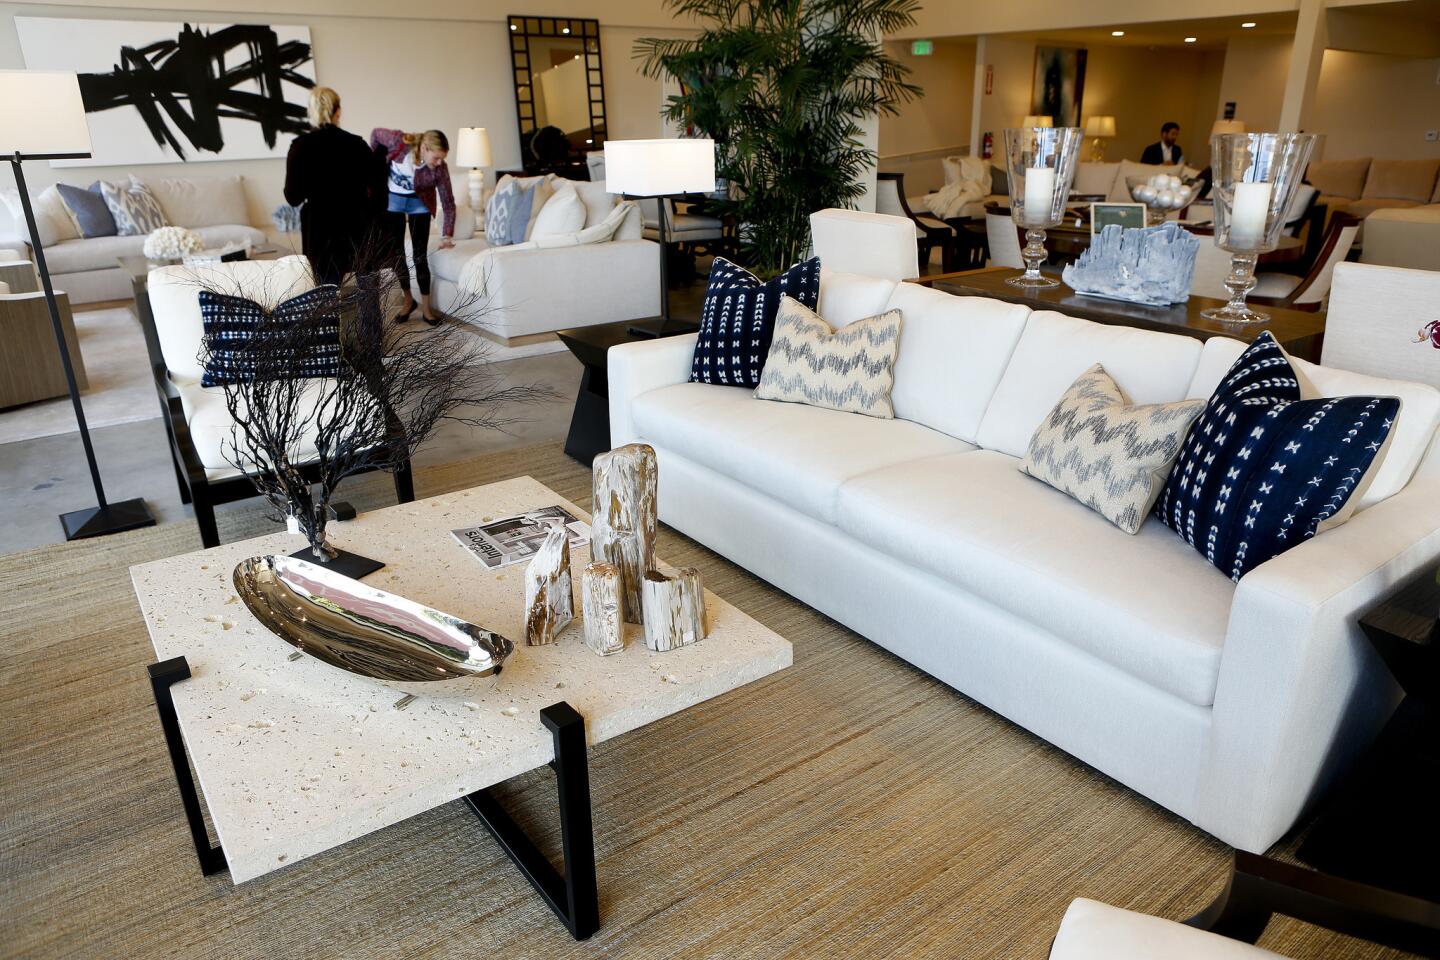 A 100% shellstone slab coffee table, left, and a transitional/contemporary larger scale sofa, right, both part of the Libra collection, are on display at Kreiss Furniture in West Hollywood.